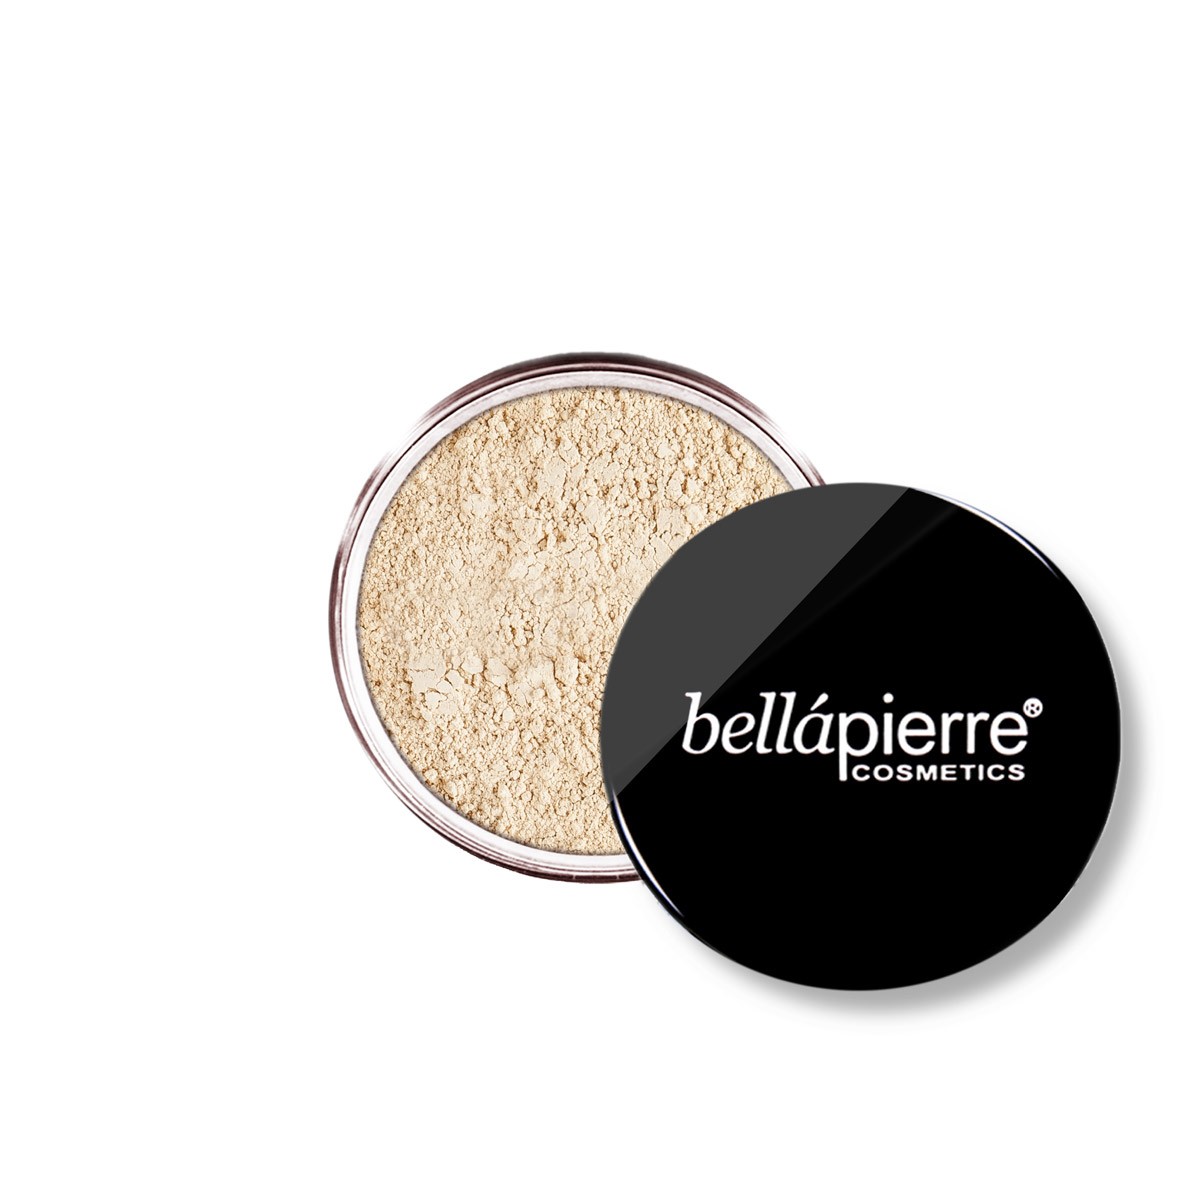 Bellapierre Mineral loose foundation ultra